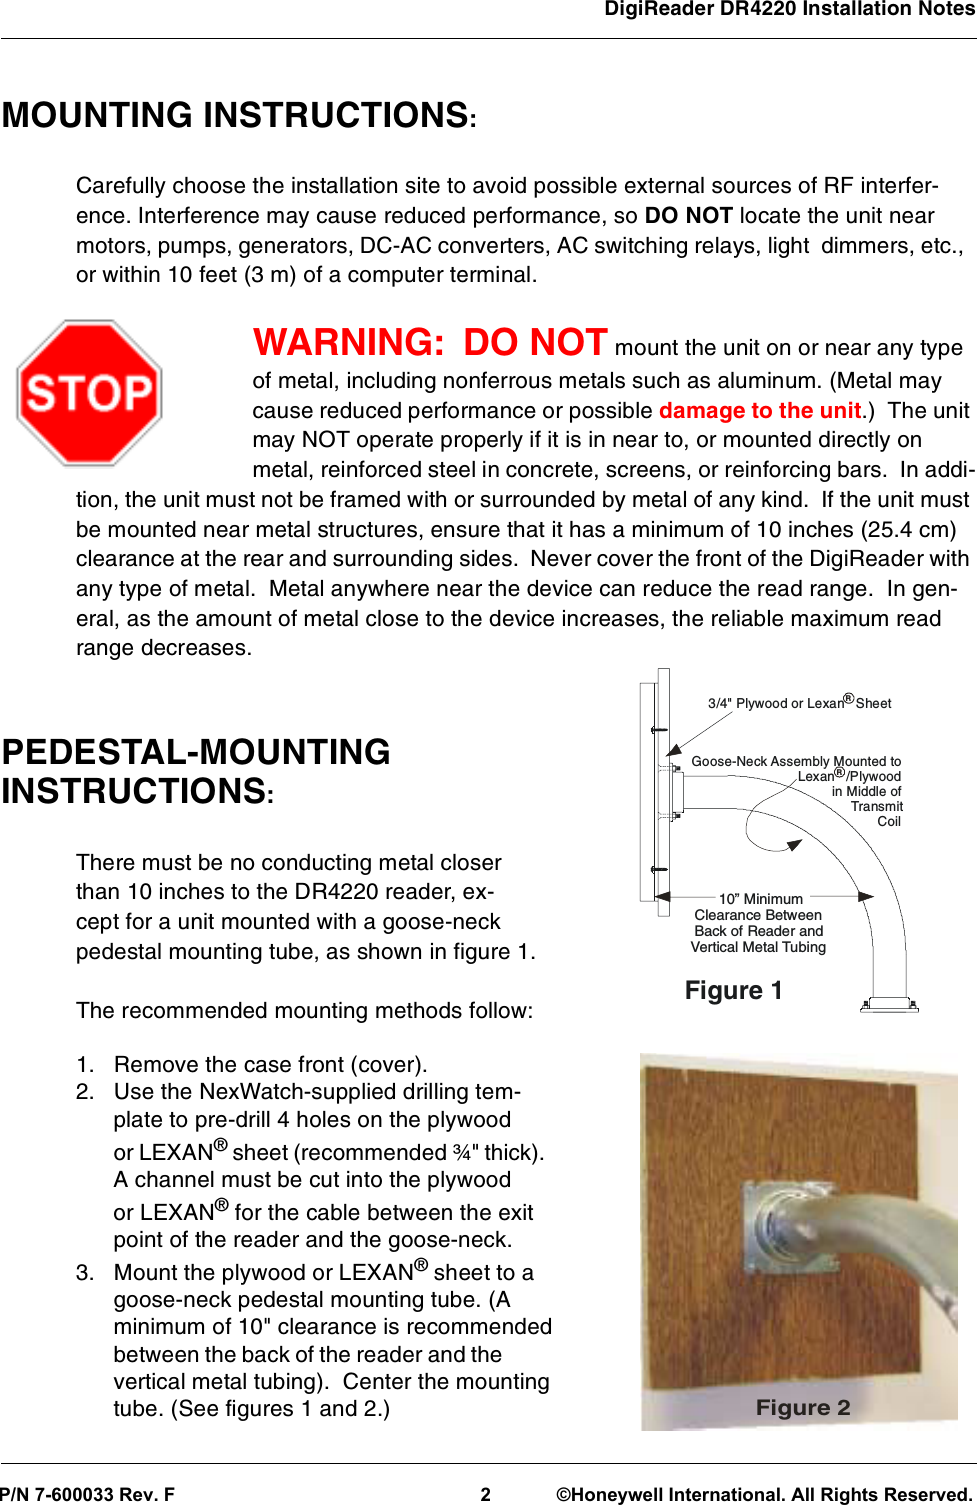 DigiReader DR4220 Installation Notes MOUNTING INSTRUCTIONS:Carefully choose the installation site to avoid possible external sources of RF interfer-ence. Interference may cause reduced performance, so DO NOT locate the unit nearmotors, pumps, generators, DC-AC converters, AC switching relays, light dimmers, etc.,or within 10 feet (3 m) of a computer terminal.WARNING: DO NOT mount the unit on or near any typeof metal, including nonferrous metals such as aluminum. (Metal maycause reduced performance or possible damage to the unit.) The unitmay NOT operate properly if it is in near to, or mounted directly onmetal, reinforced steel in concrete, screens, or reinforcing bars. In addi-tion, the unit must not be framed with or surrounded by metal of any kind. If the unit mustbe mounted near metal structures, ensure that it has a minimum of 10 inches (25.4 cm)clearance at the rear and surrounding sides. Never cover the front of the DigiReader withany type of metal. Metal anywhere near the device can reduce the read range. In gen-eral, as the amount of metal close to the device increases, the reliable maximum readrange decreases.PEDESTAL-MOUNTINGINSTRUCTIONS:There must be no conducting metal closerthan 10 inches to the DR4220 reader, ex-cept for a unit mounted with a goose-neckpedestal mounting tube, as shown in figure 1.The recommended mounting methods follow:1. Remove the case front (cover).2. Use the NexWatch-supplied drilling tem-plate to pre-drill 4 holes on the plywoodor LEXAN®sheet (recommended ¾&quot; thick).A channel must be cut into the plywoodor LEXAN®for the cable between the exitpoint of the reader and the goose-neck.3. Mount the plywood or LEXAN®sheet to agoose-neck pedestal mounting tube. (Aminimum of 10&quot; clearance is recommendedbetween the back of the reader and thevertical metal tubing). Center the mountingtube. (See figures 1 and 2.)Figure 23/4&quot; Plywood or Lexan Sheet10” MinimumClearance BetweenBack of Reader andVertical Metal TubingGoose-Neck Assembly Mounted toLexan /Plywoodin Middle ofTransmitCoilFigure 1RRP/N 7-600033 Rev. F2 ©Honeywell International. All Rights Reserved.